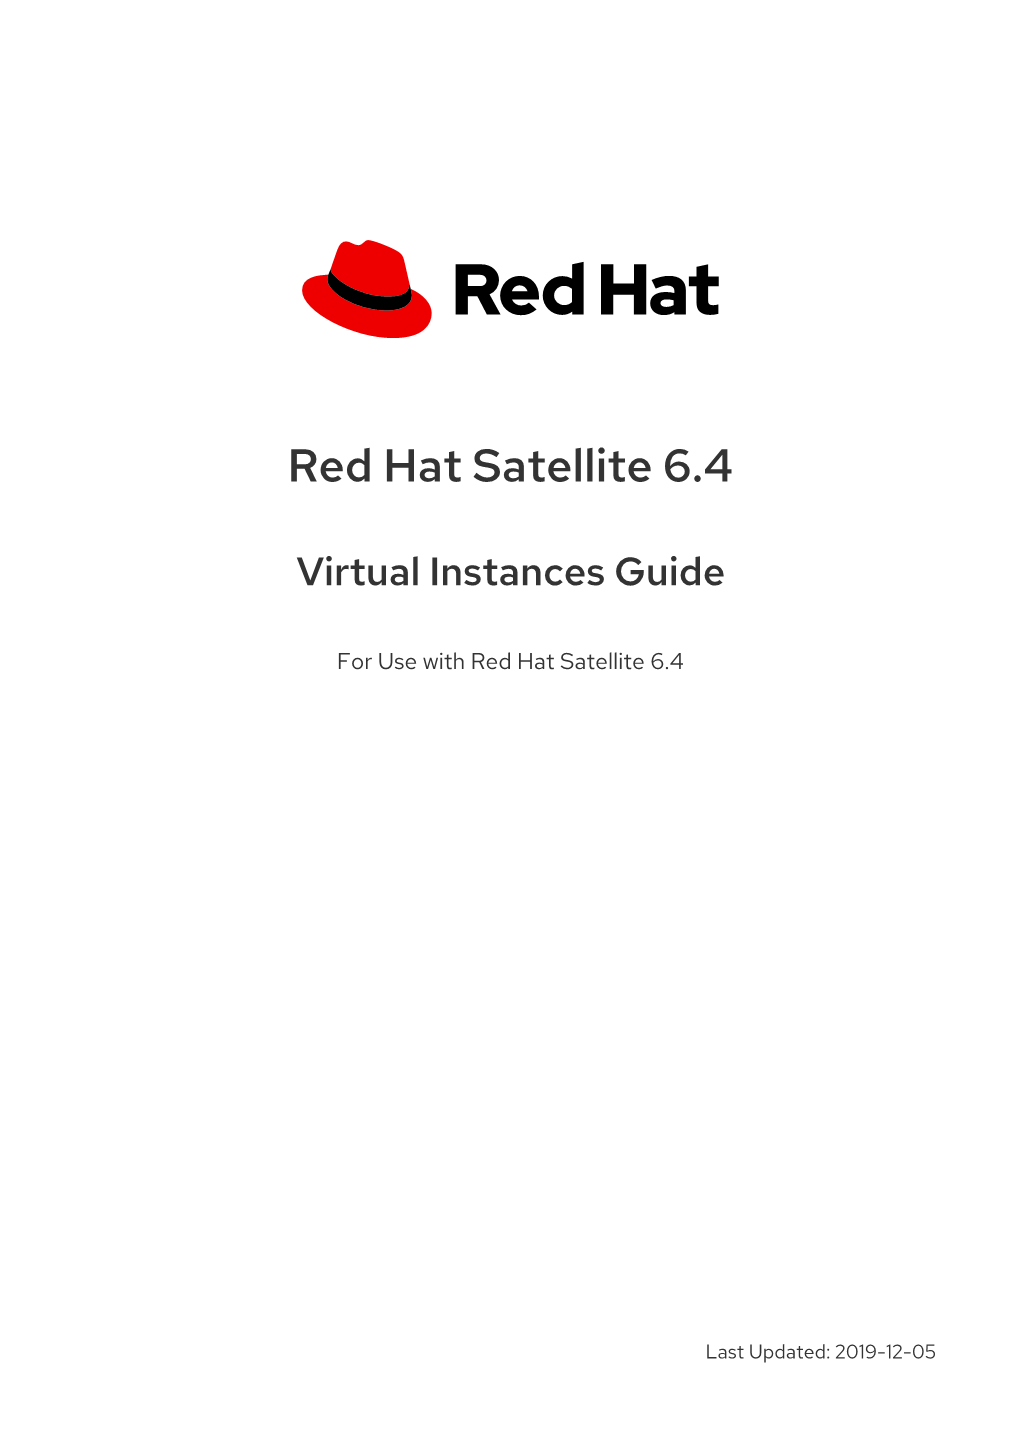 Red Hat Satellite 6.4 Virtual Instances Guide